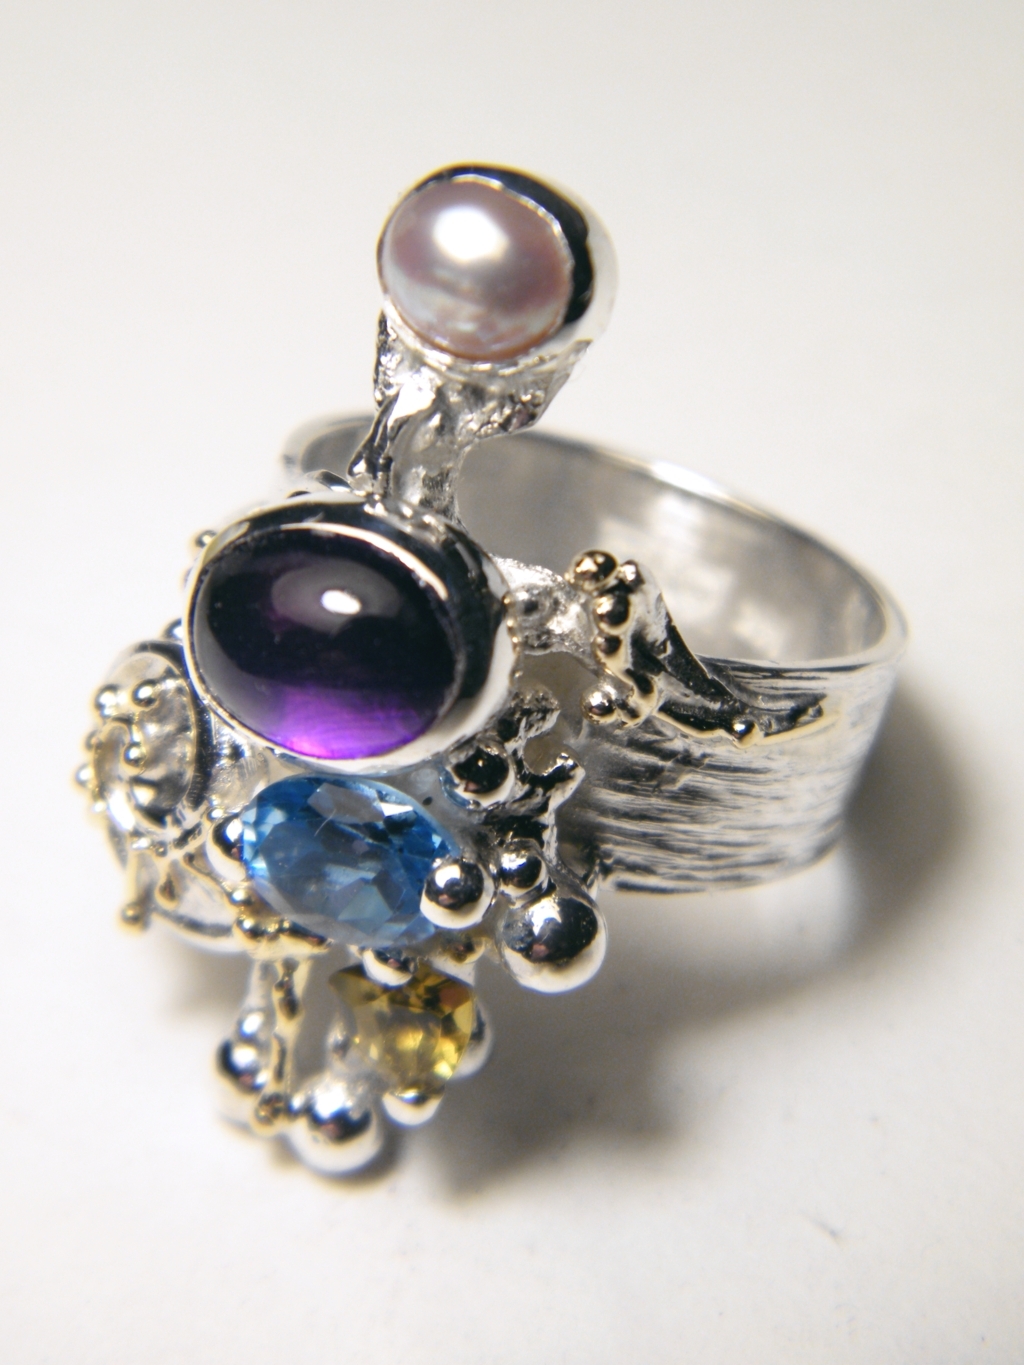 mixed metal jewelry made from silver and gold, gregory pyra piro handcrafted riing 4020, handcrafted rings for women with amethyst and blue topaz, handcrafted rings for women with blue topaz and peridot, handcrafted rings for women with amethyst and blue topaz, handcrafted jewellery with facet cut gemstones and pearls, handcrafted jewellery and rings shown in art and craft galleries